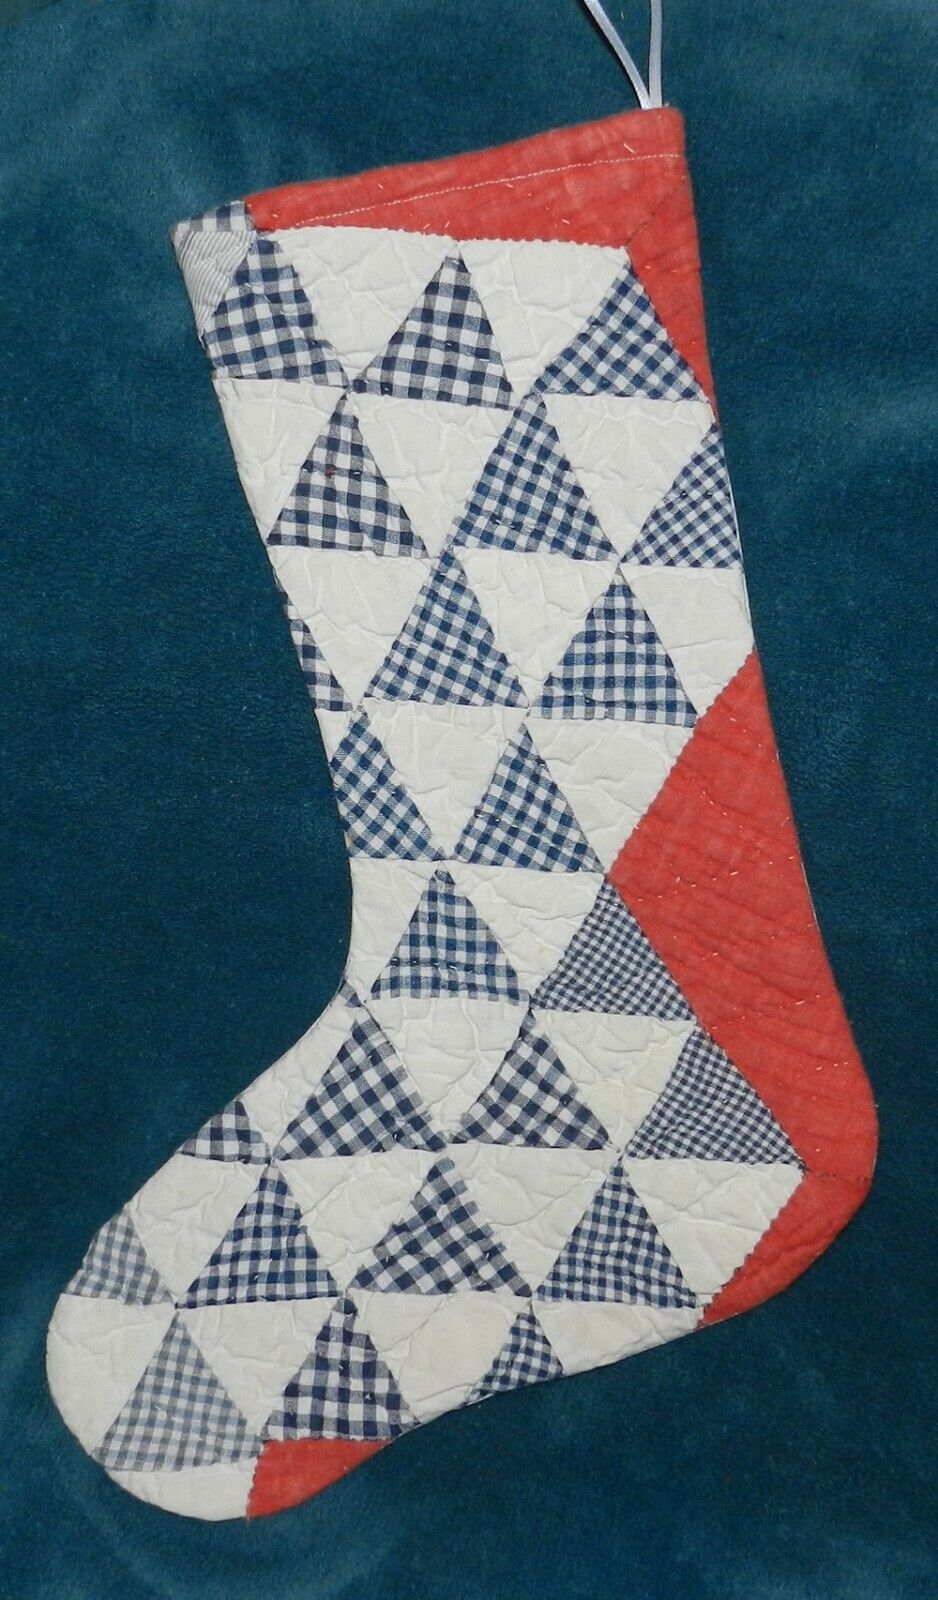 FABULOUS ANTIQUE VINTAGE CUTTER QUILT CHRISTMAS STOCKING RED WHITE BLUE 23-180